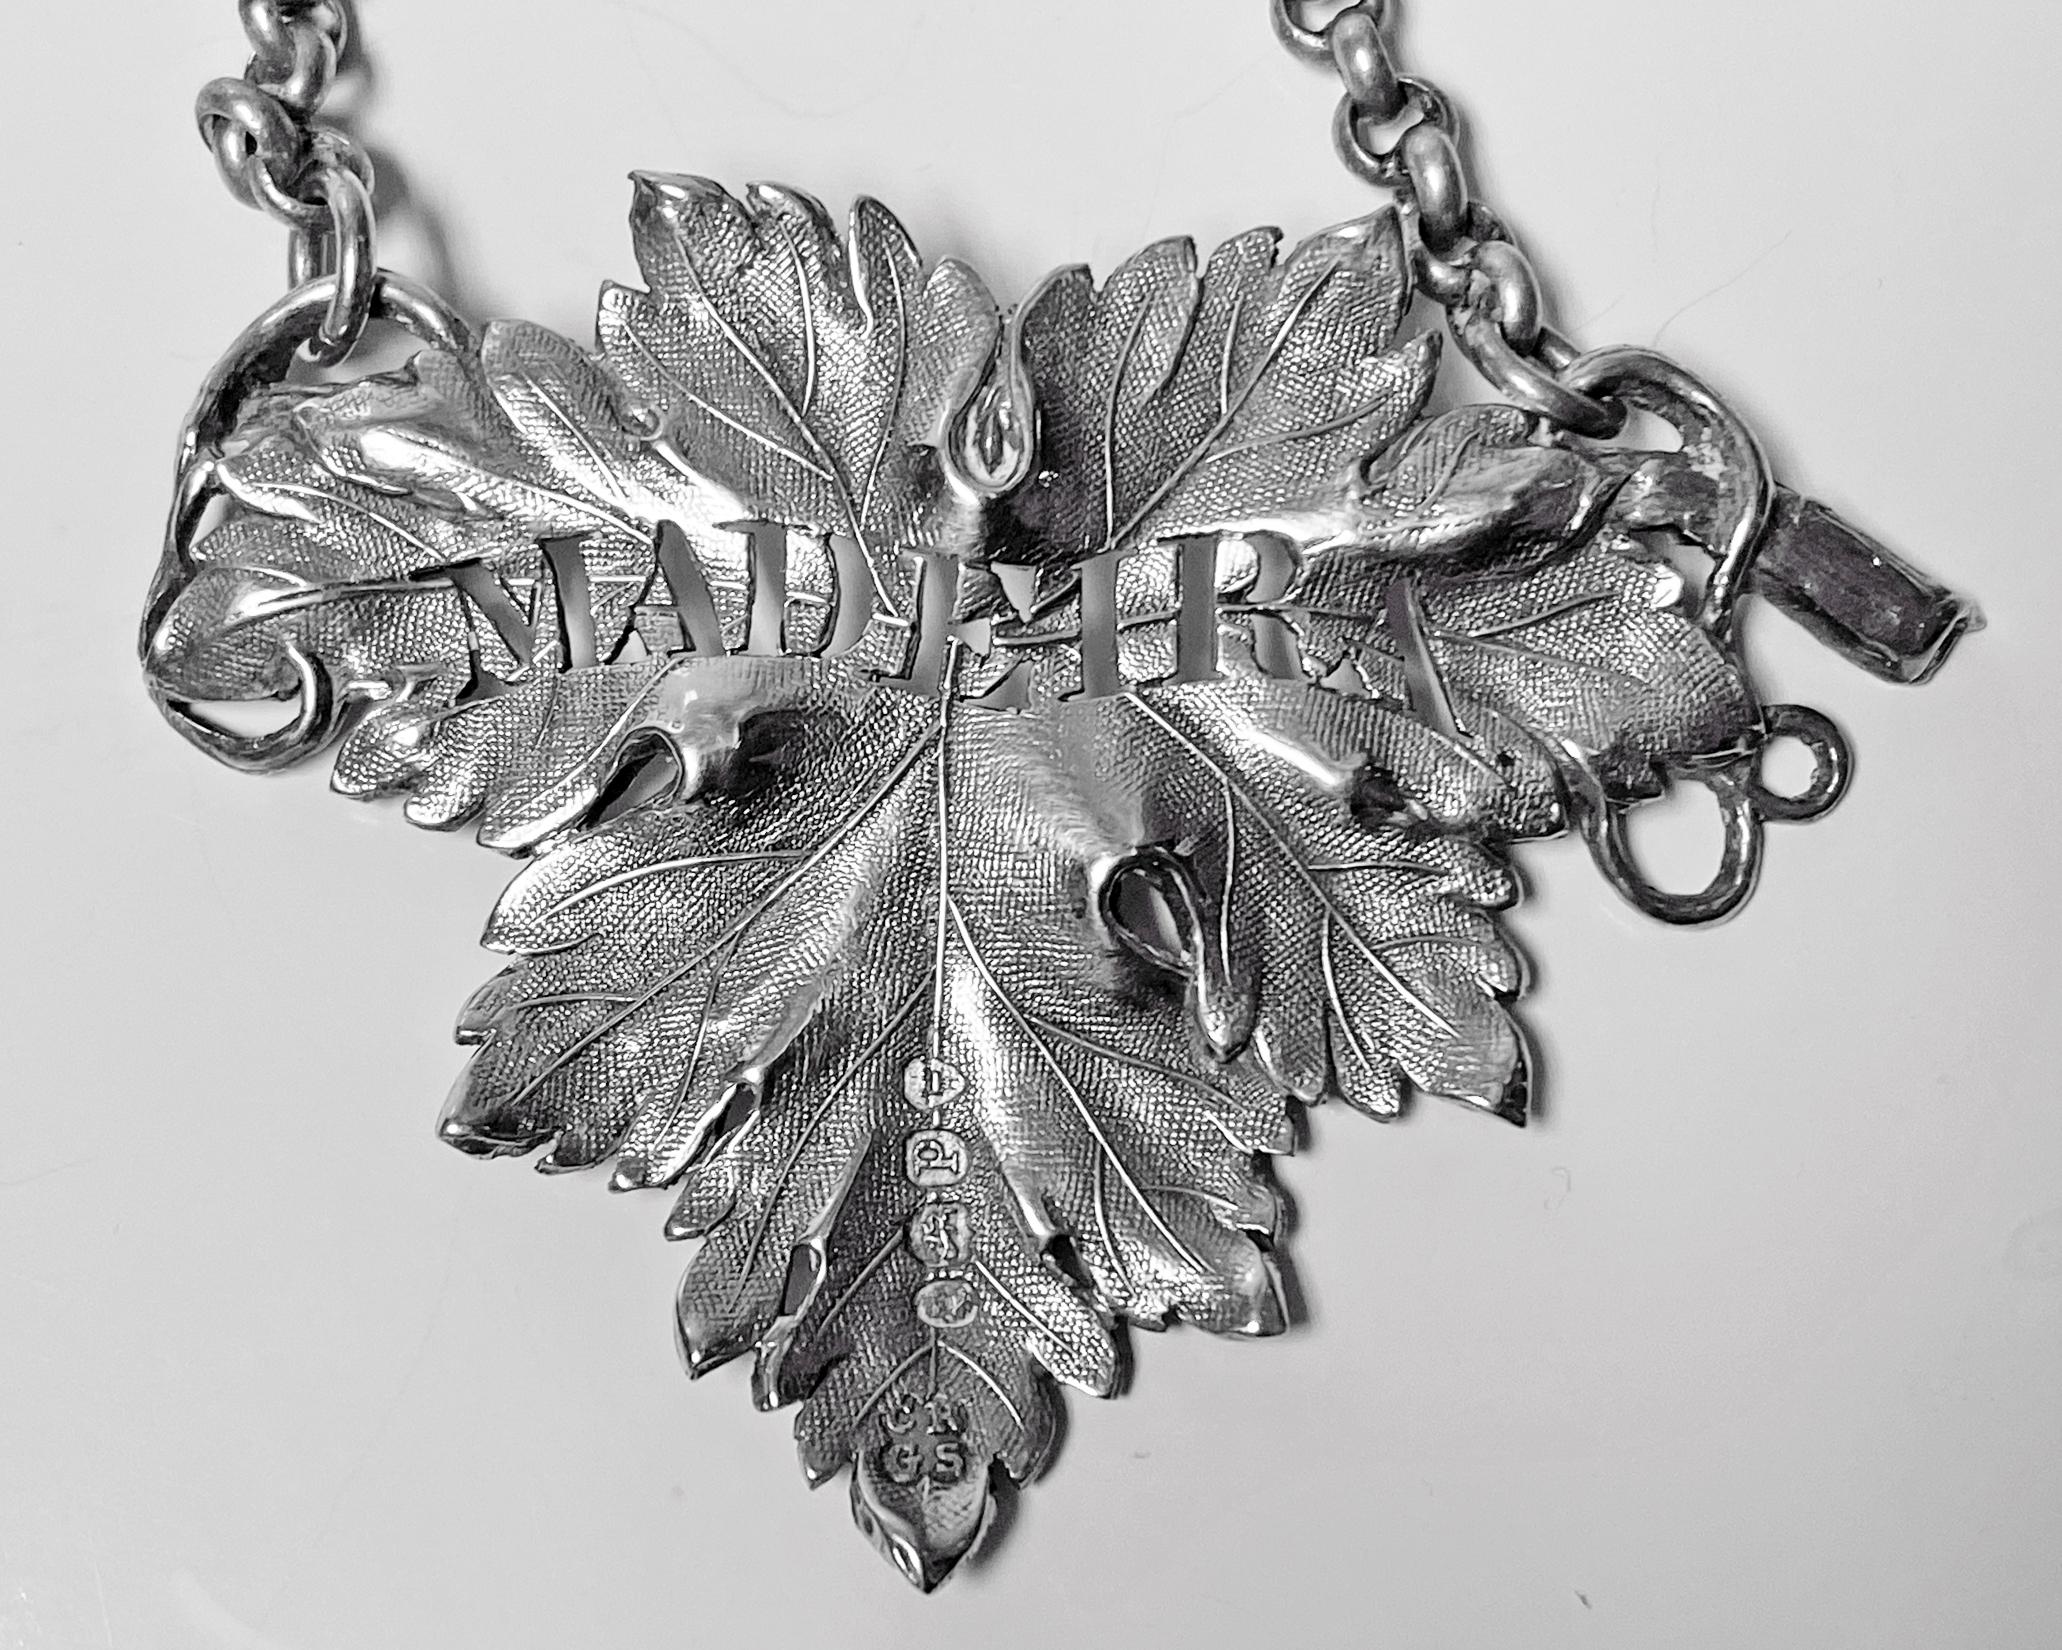 Antique silver Madeira Wine label, London 1830, Reily & Storer. The label of vine leaf form, realistic textured decoration, original chain link attached. Fully hallmarked. Measures: 2.5 x 2 inches (5x2 including chain). Weight: 18.4 gm.